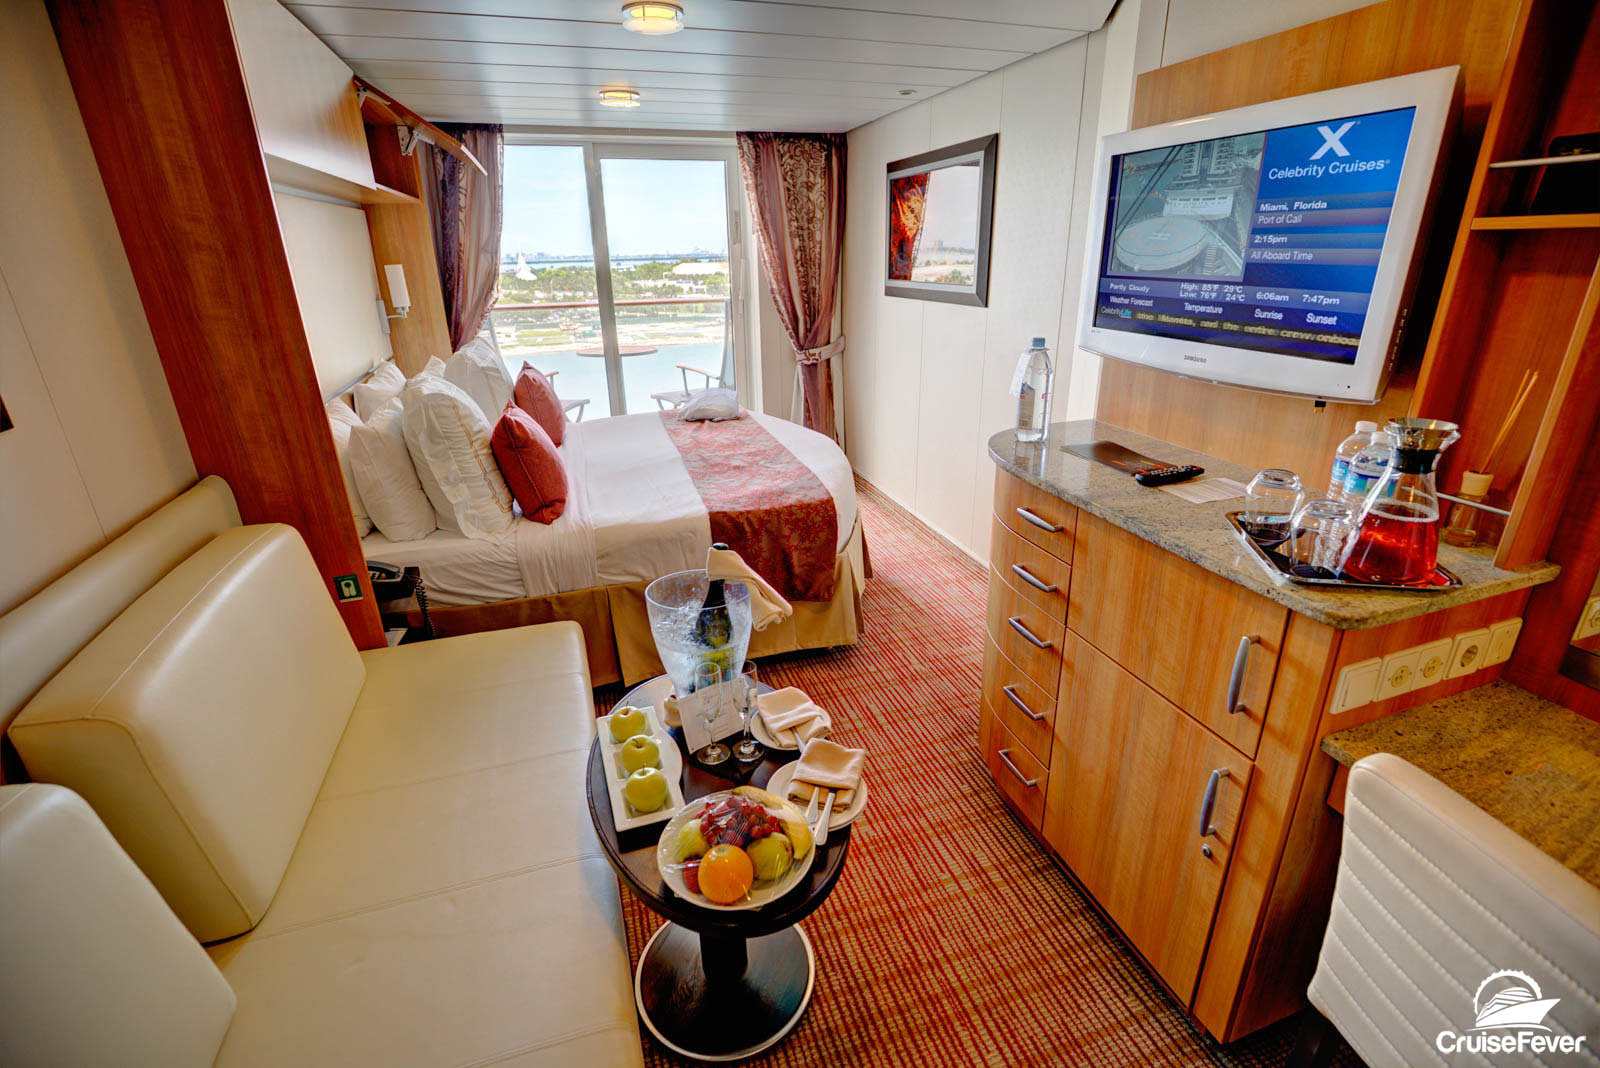 Cabins On Cruises You Should Stay Away From